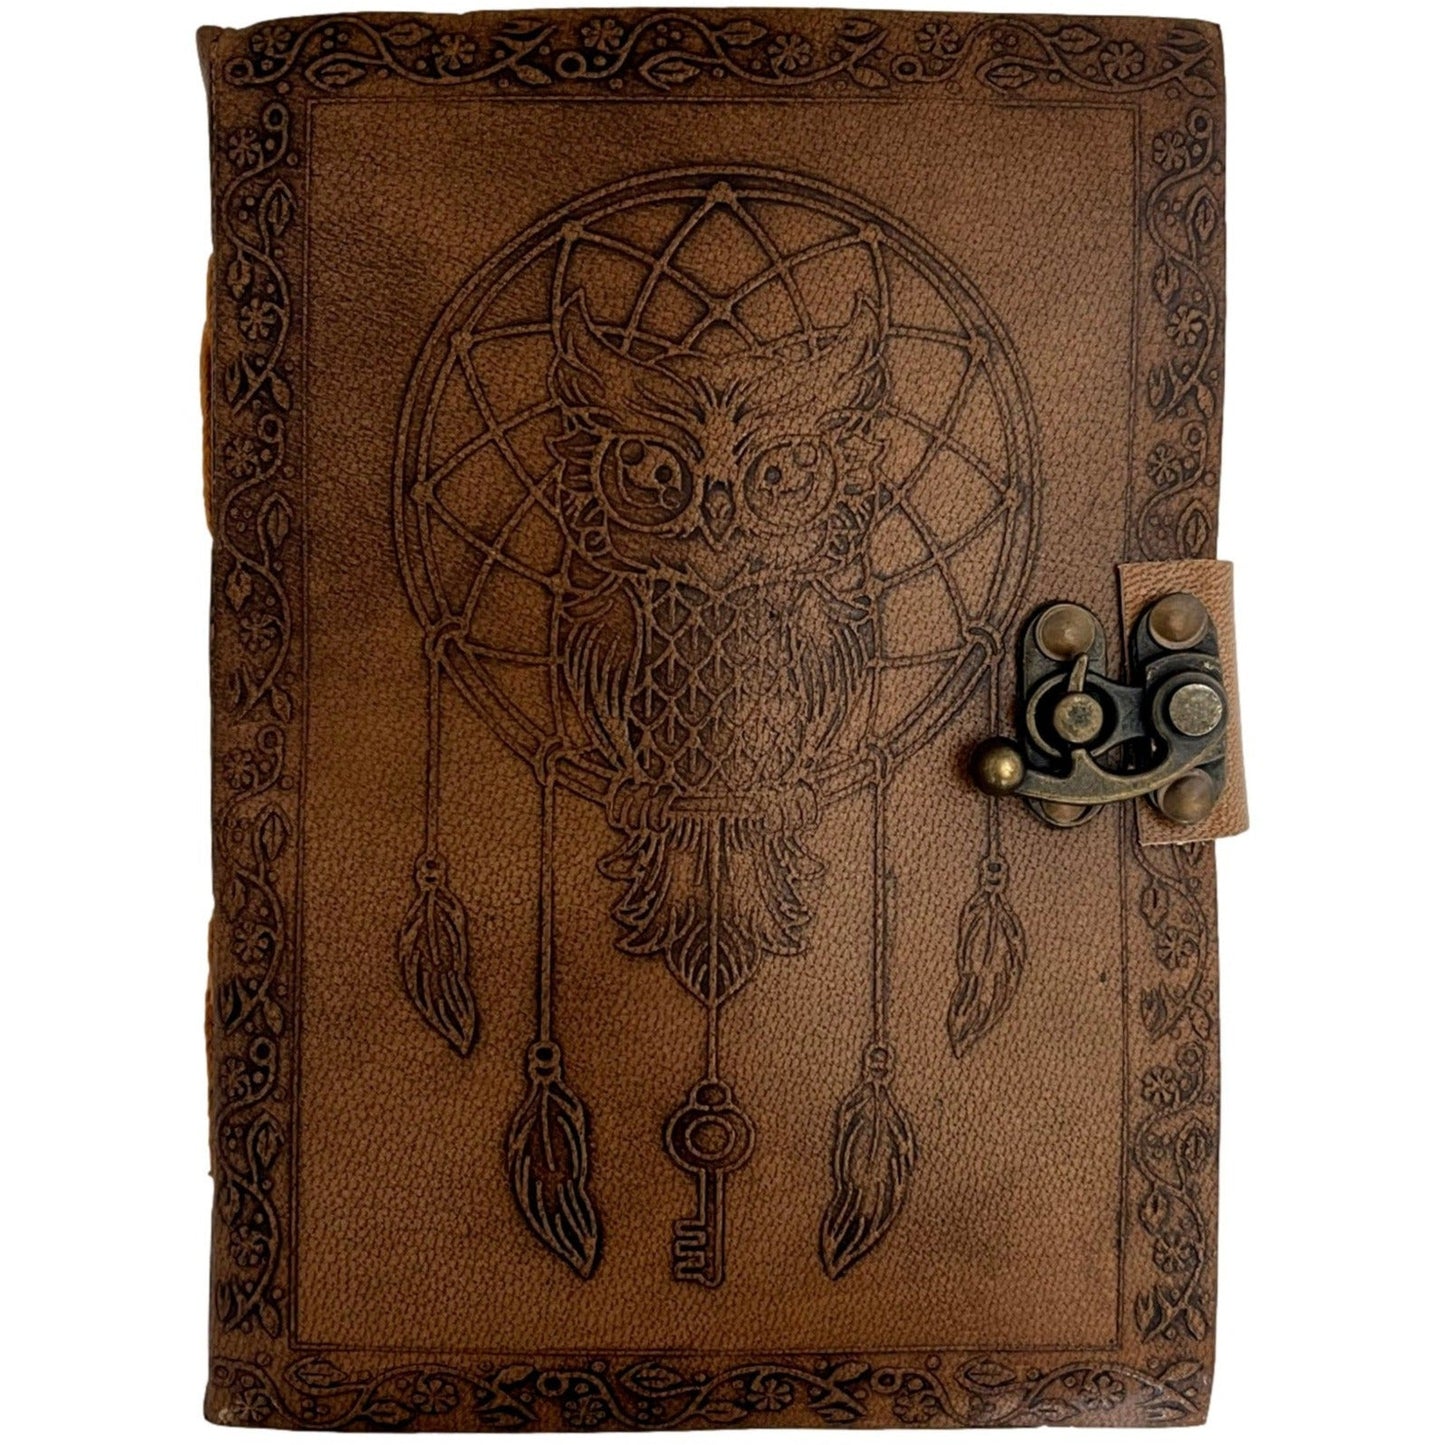 100% Leather Journal Embossed with Owl Dreamcatcher